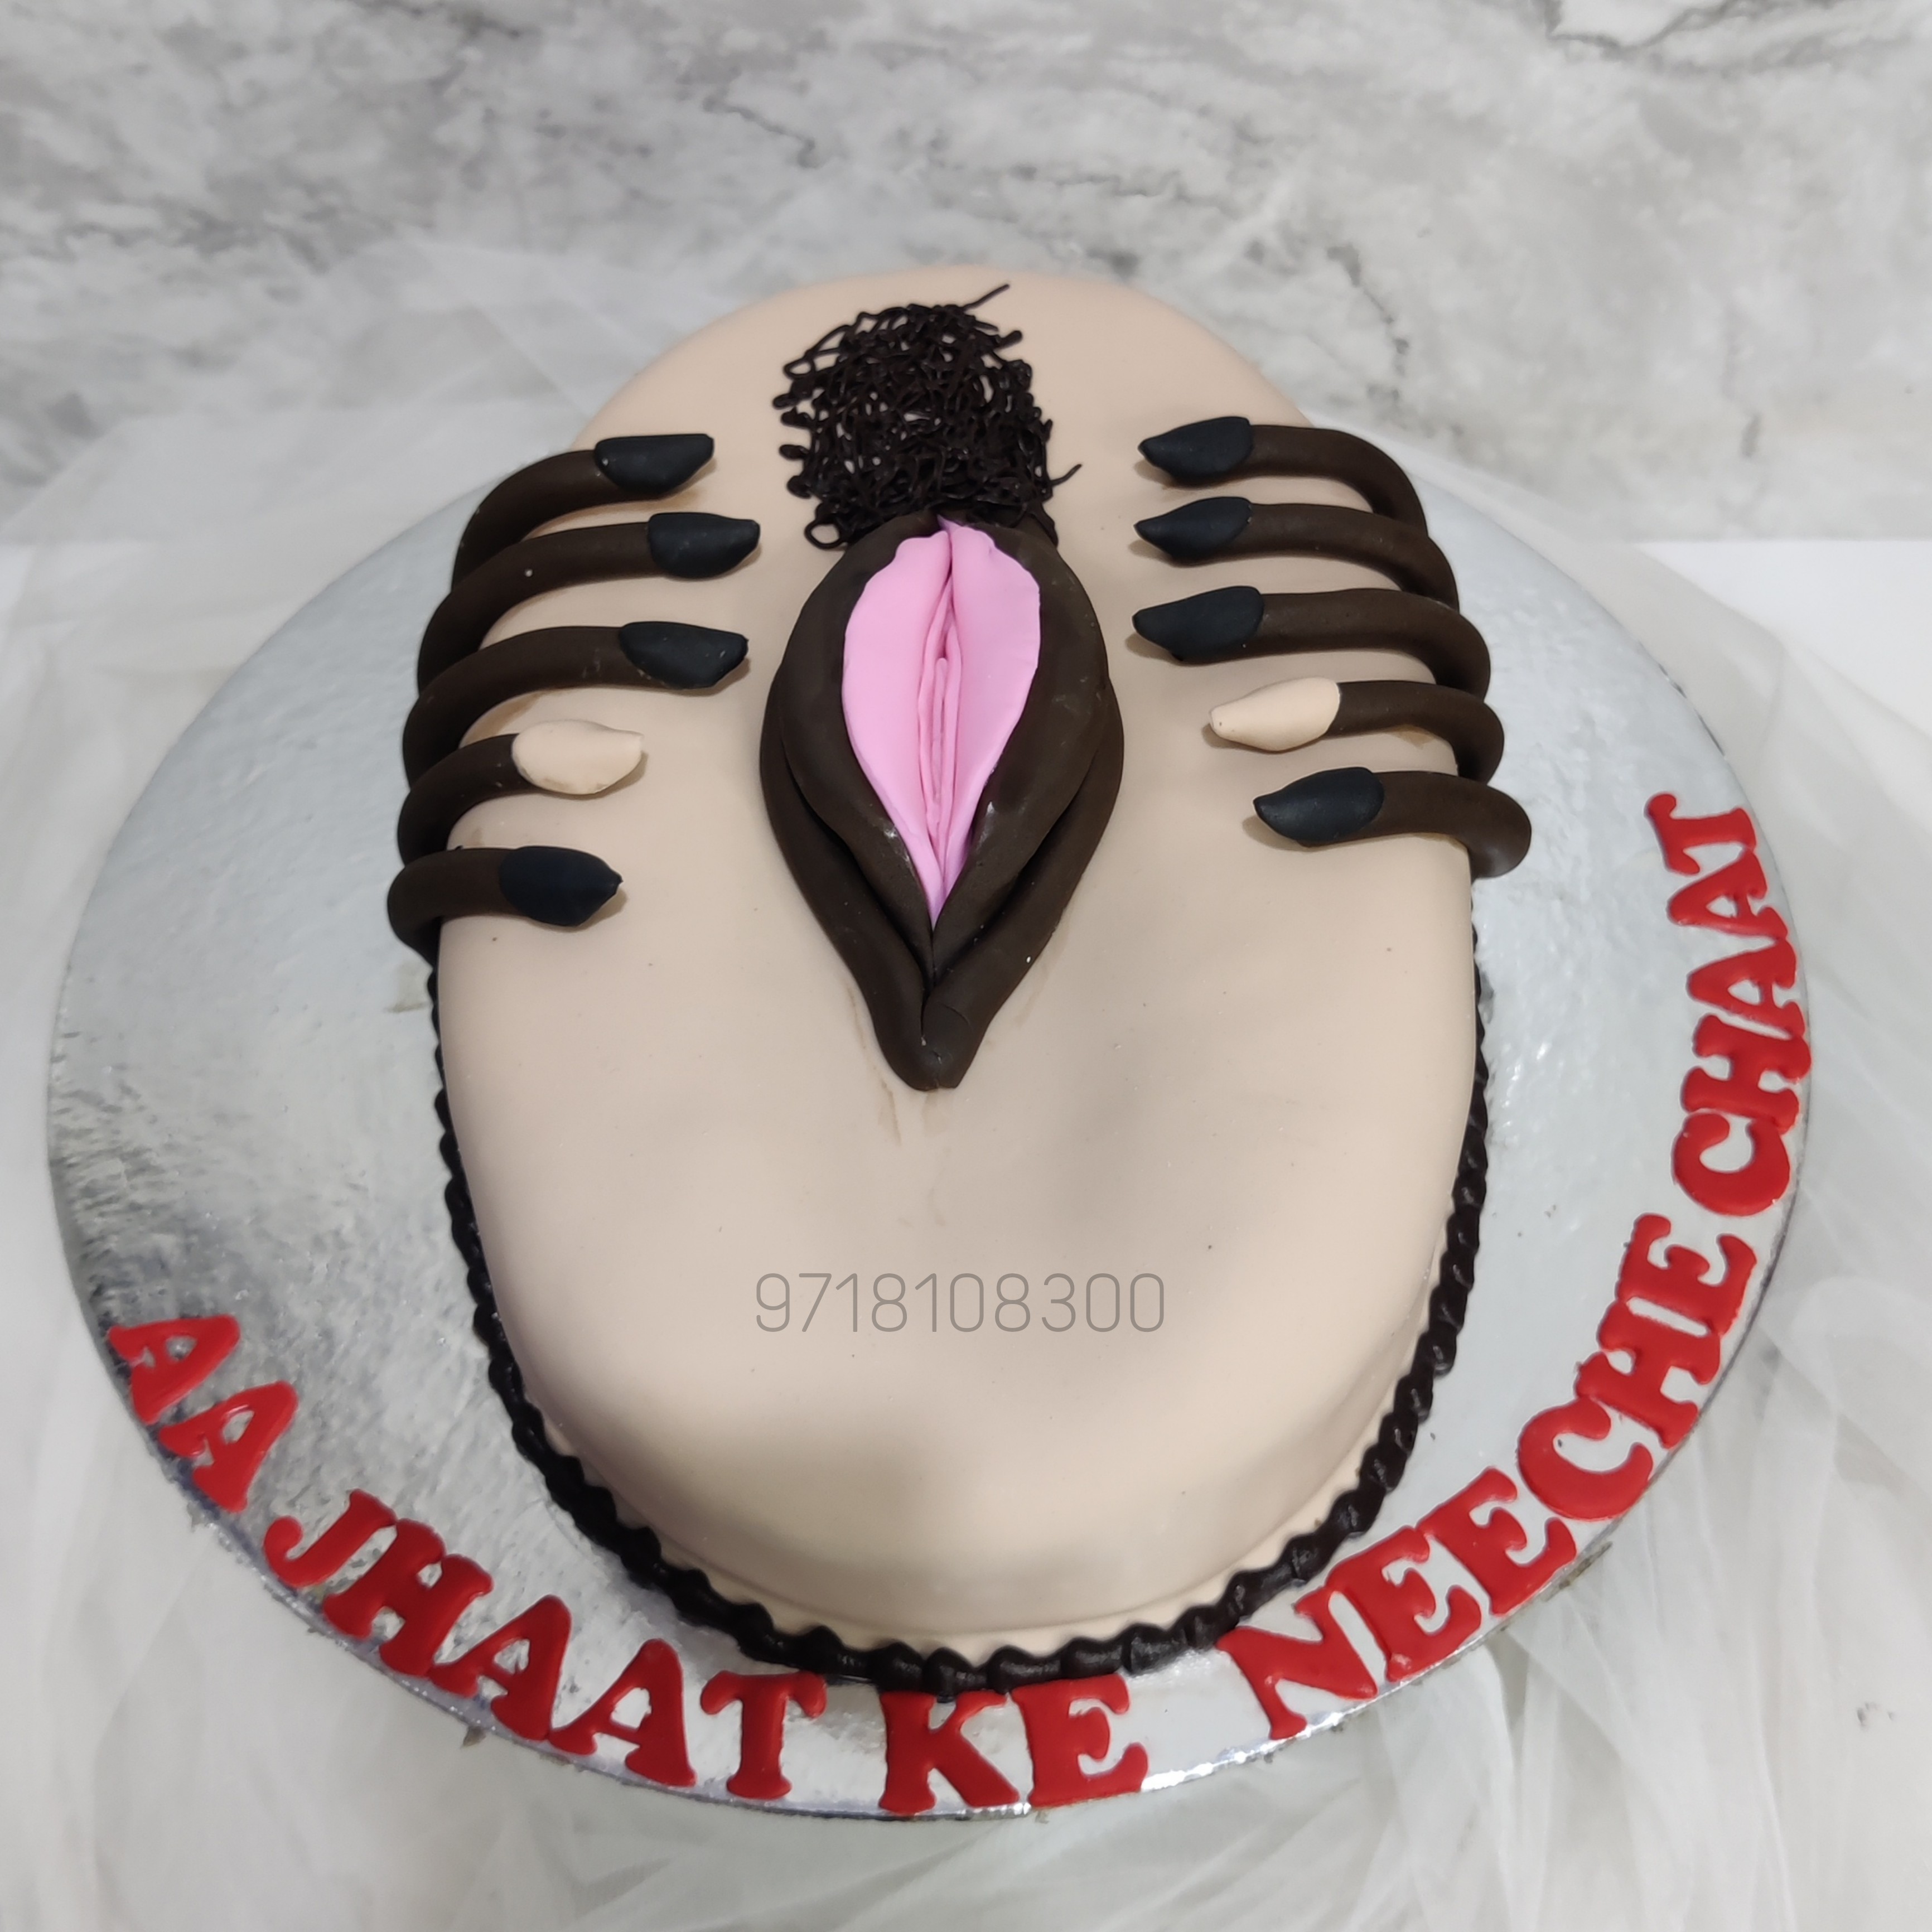 Bachelor Party Cakes for Bride and Groom in Delhi & Gurgaon